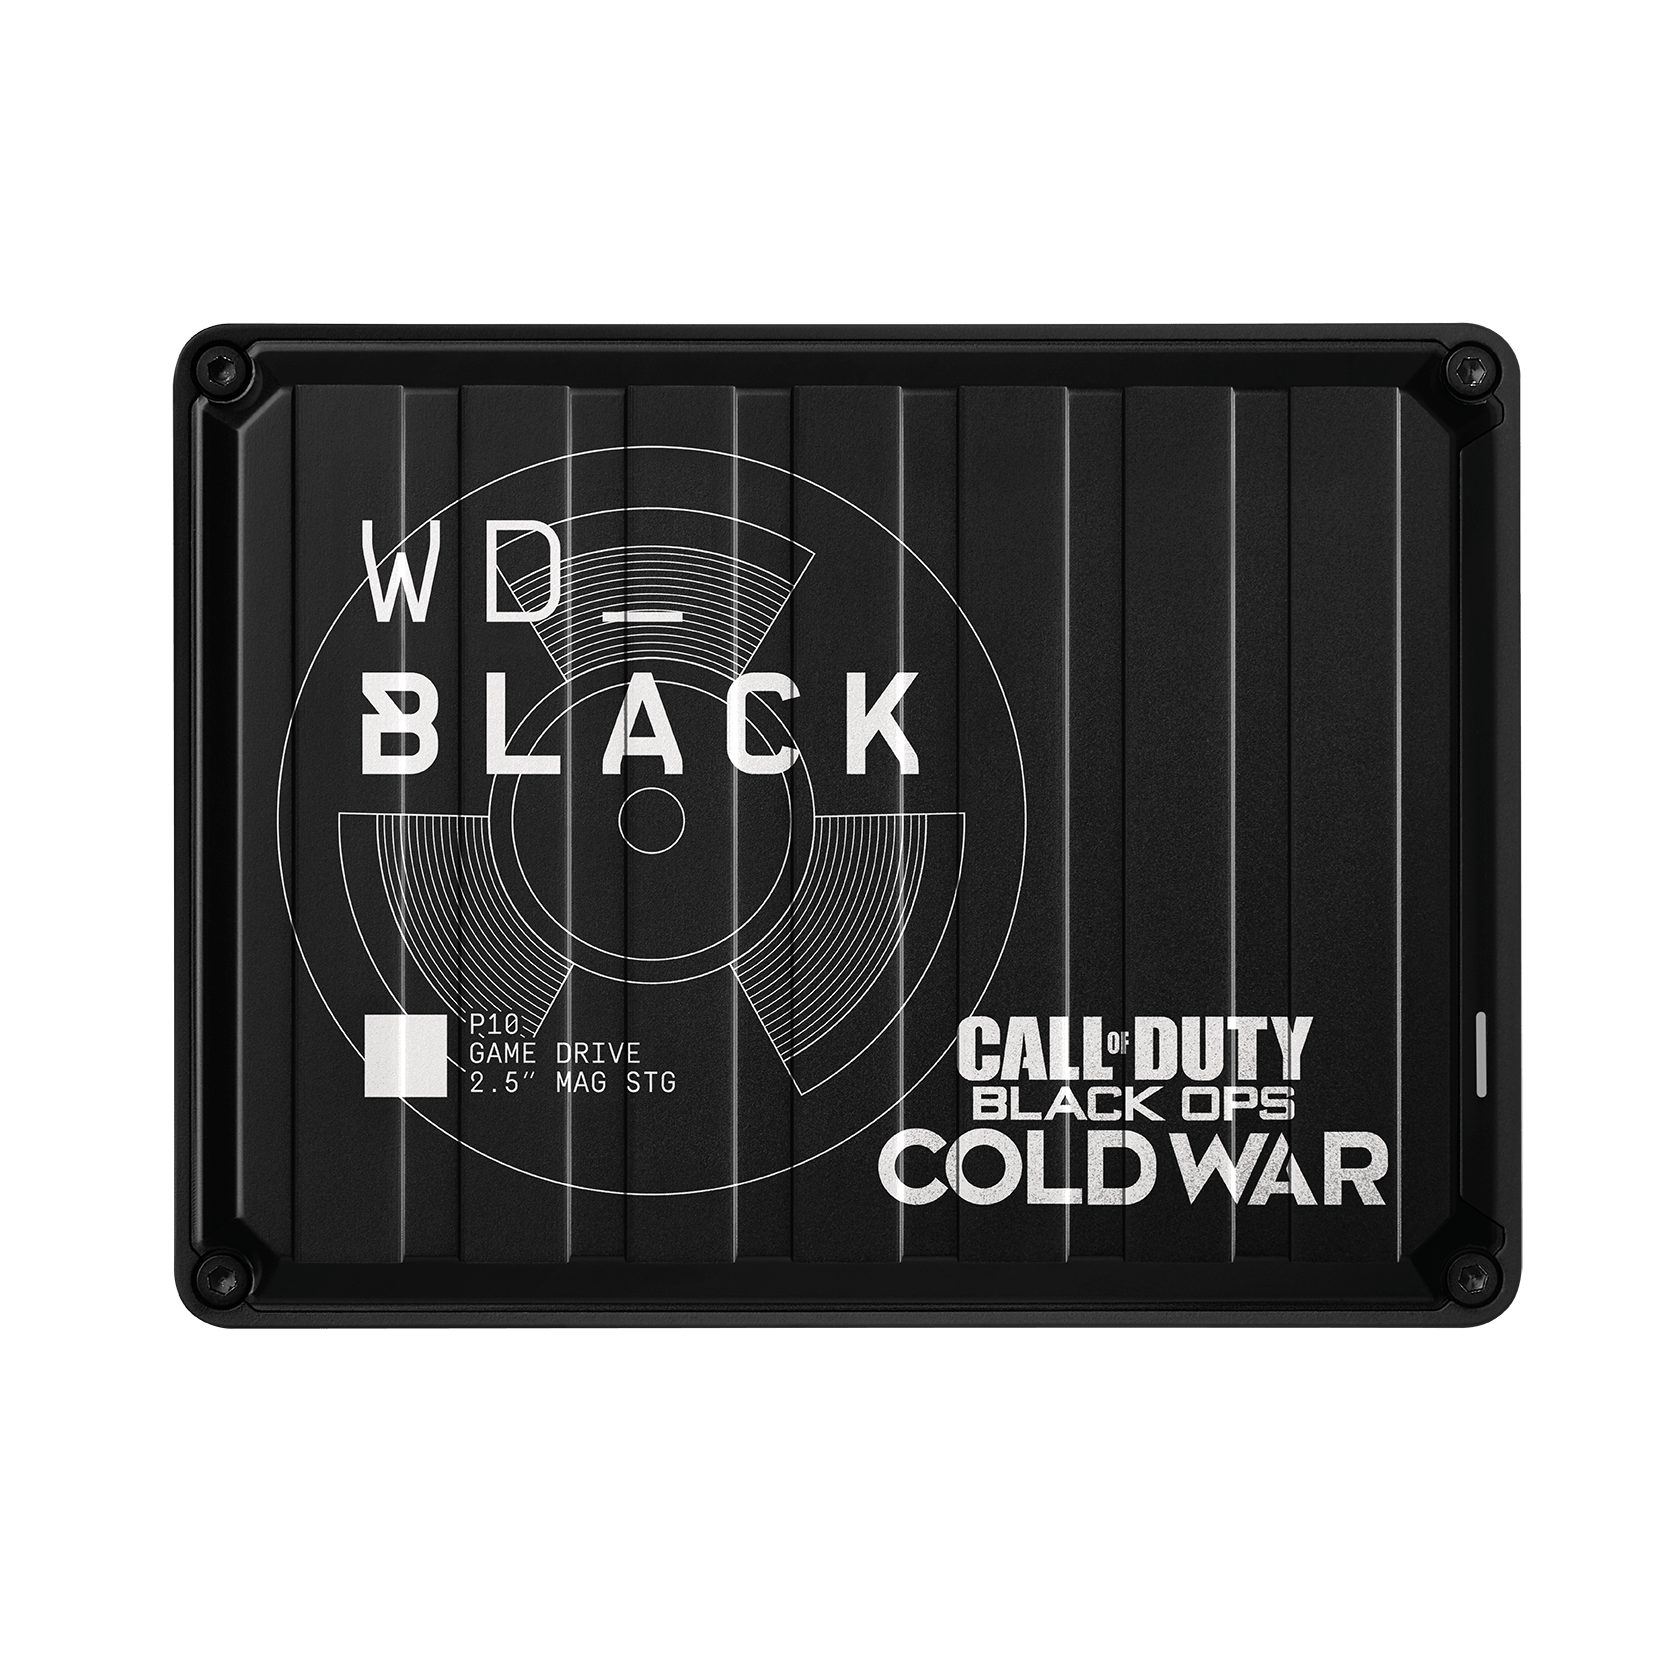 WD_BLACKâ„¢ Call Of DutyÂ®: Black Ops Cold War Special Edition P10 Game Drive - WDBAZC0020BBK-WESN